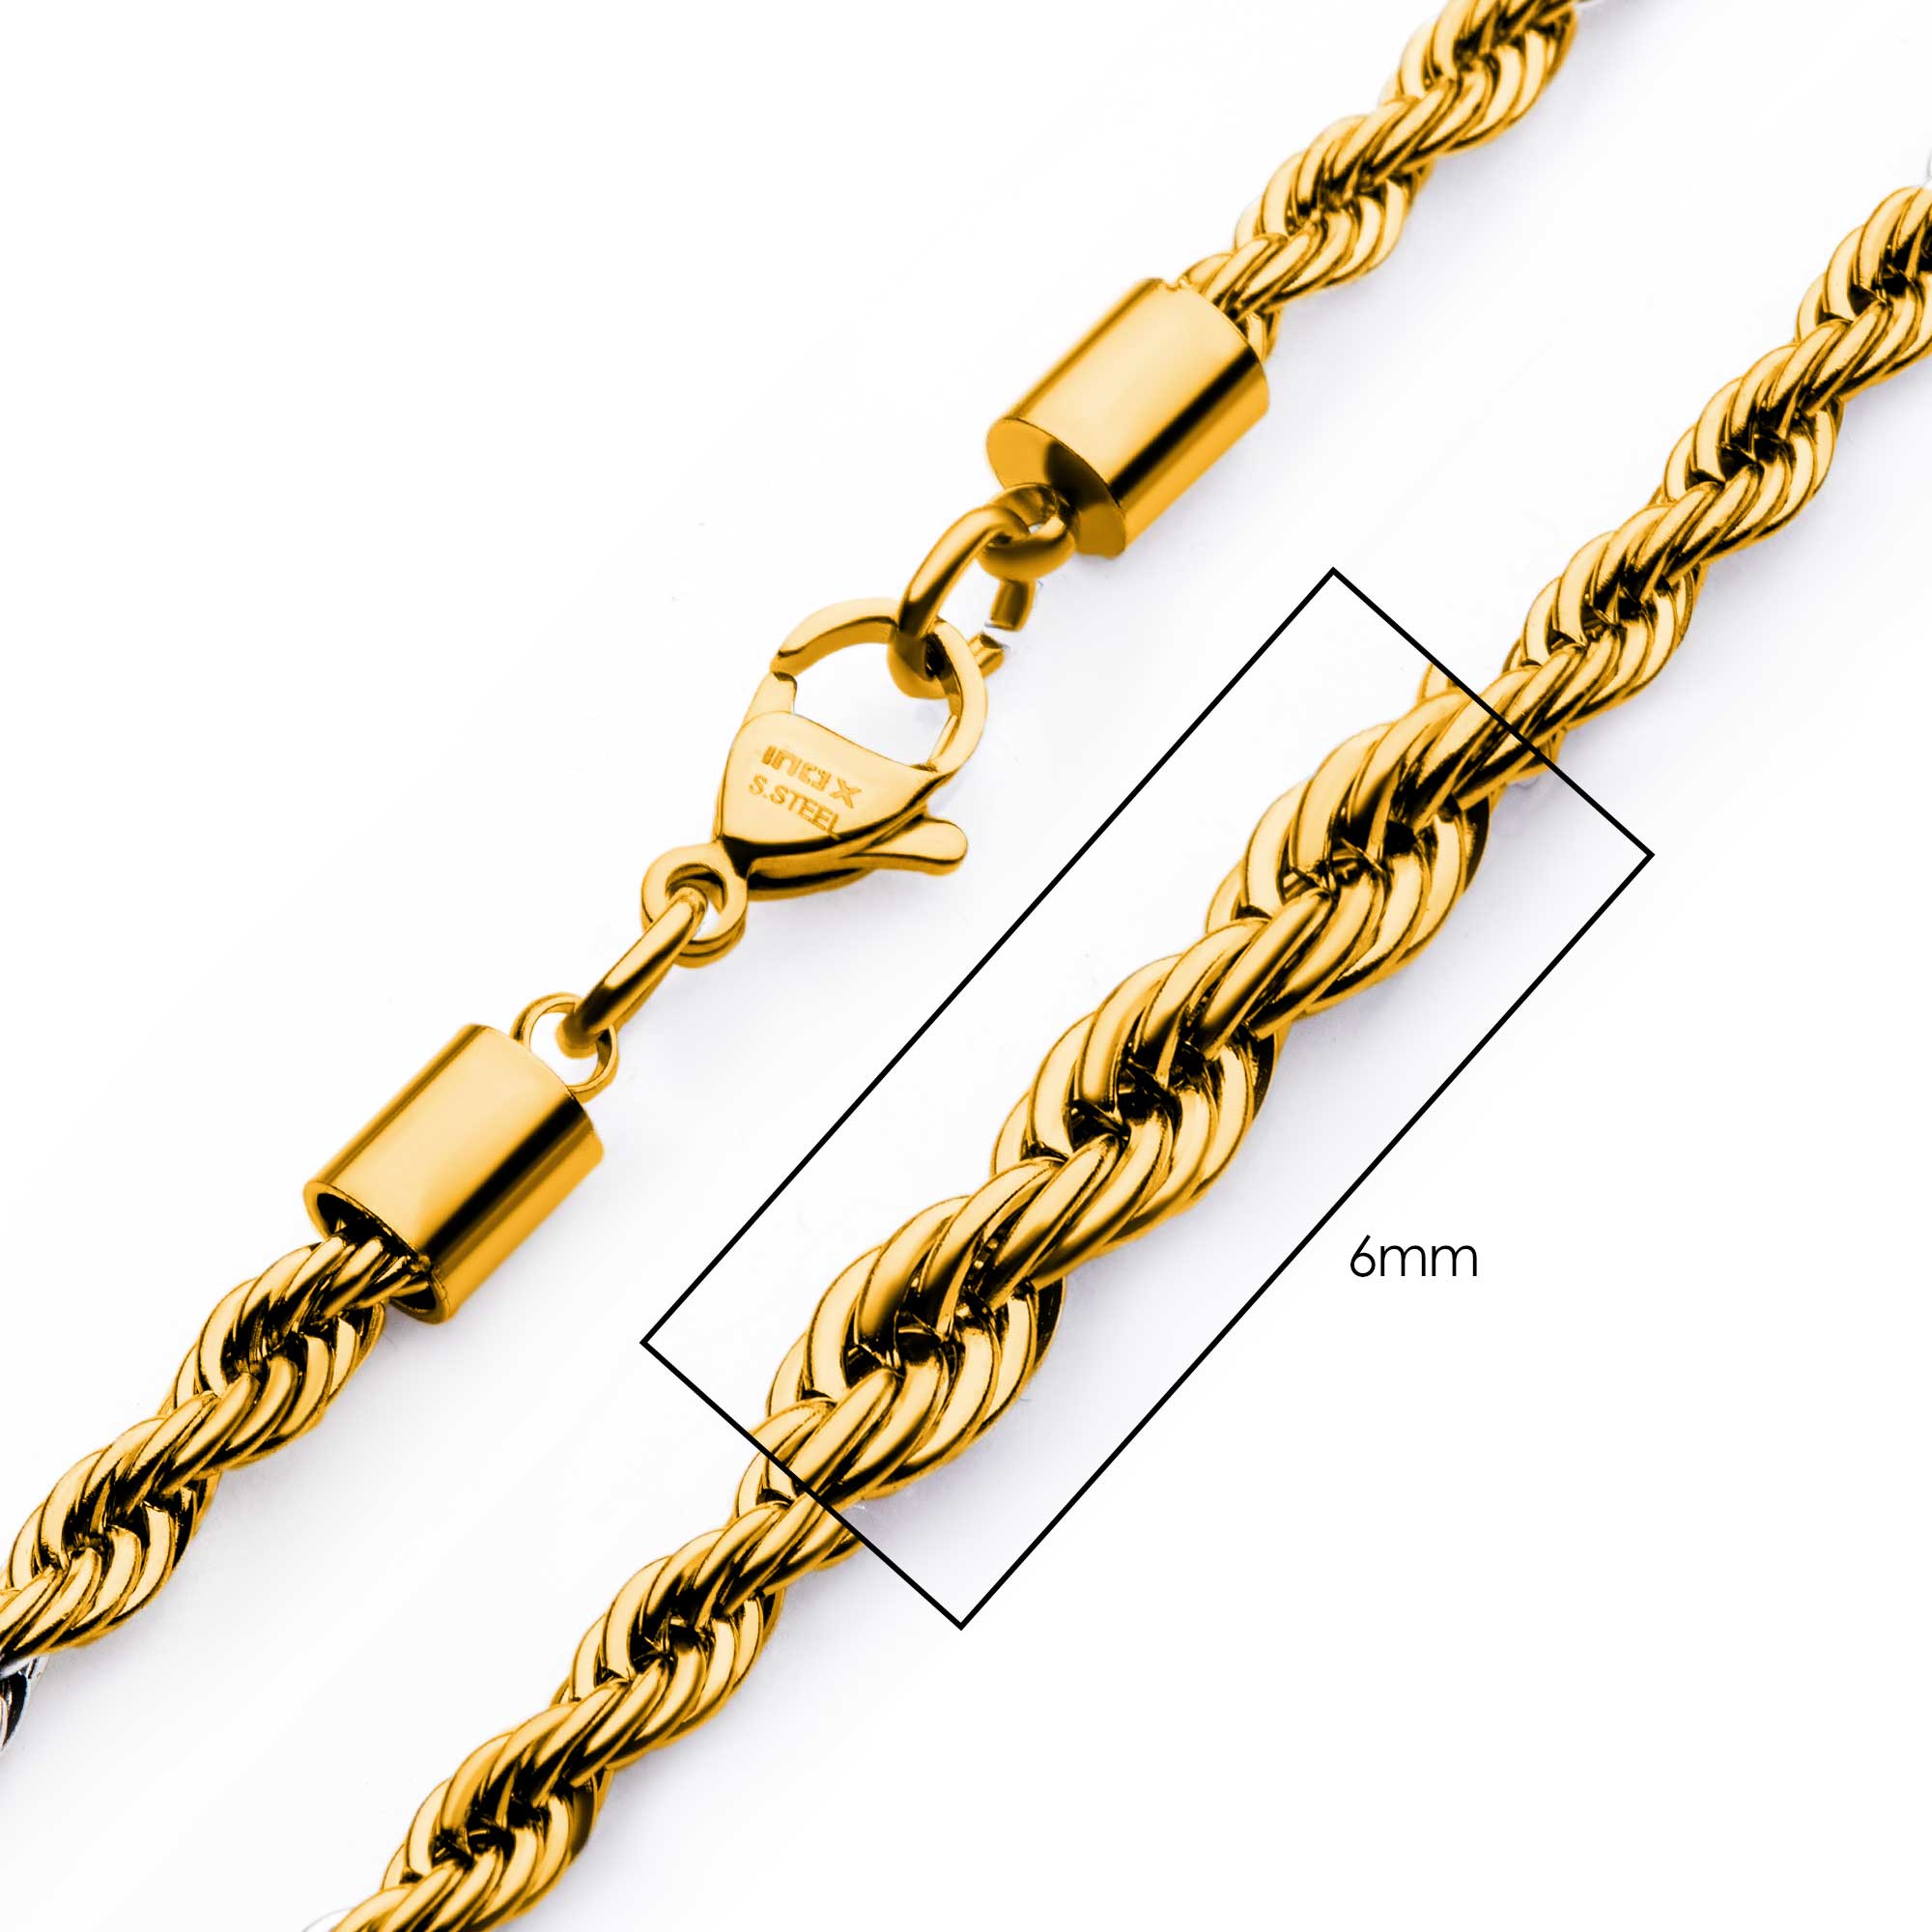 6mm 18K Gold Plated Rope Chain Spath Jewelers Bartow, FL